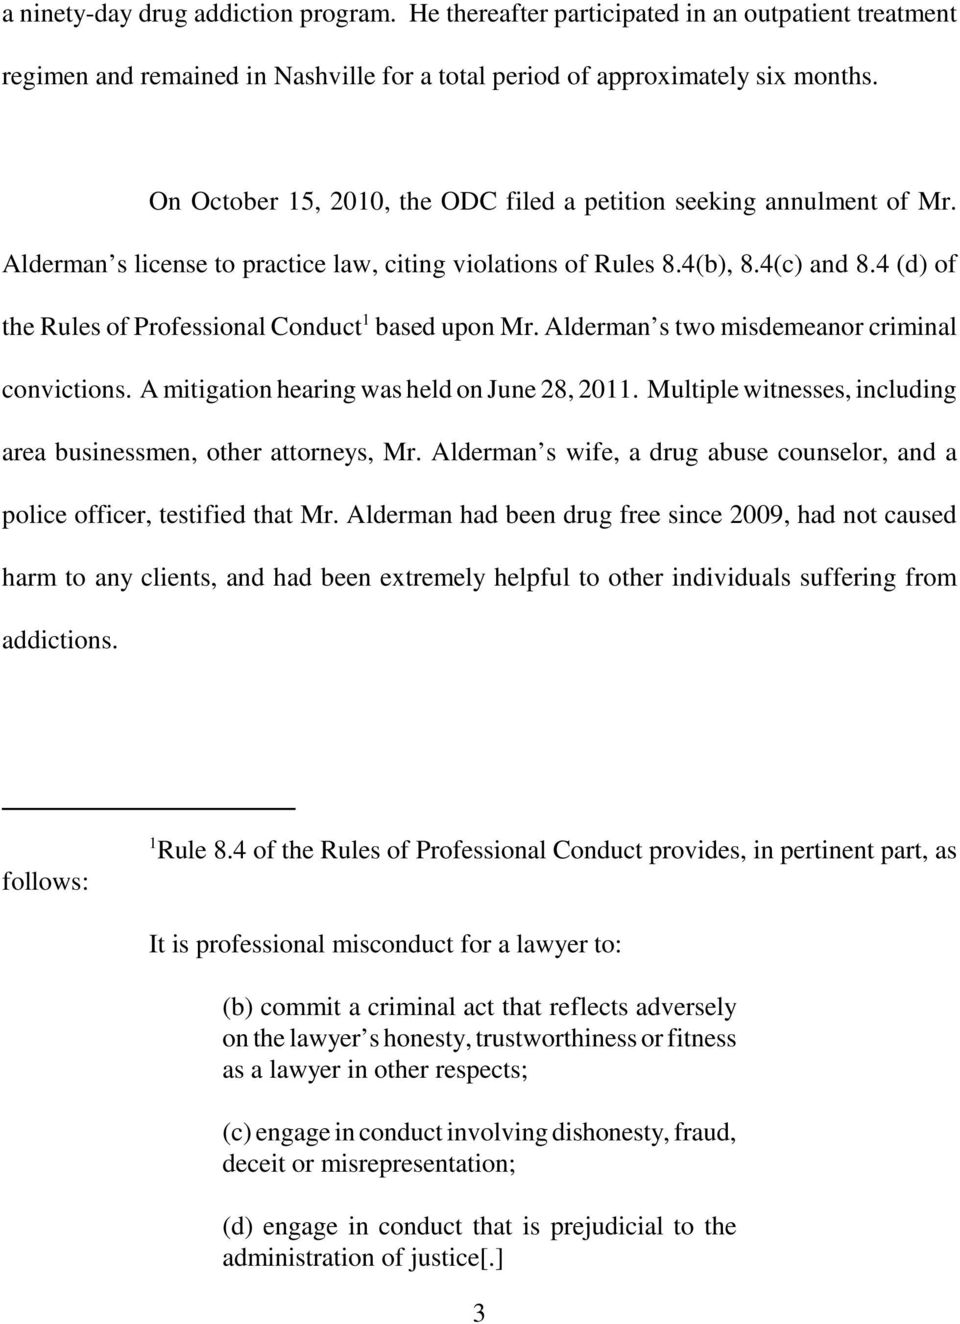 4 (d) of the Rules of Professional Conduct 1 based upon Mr. Alderman s two misdemeanor criminal convictions. A mitigation hearing was held on June 28, 2011.